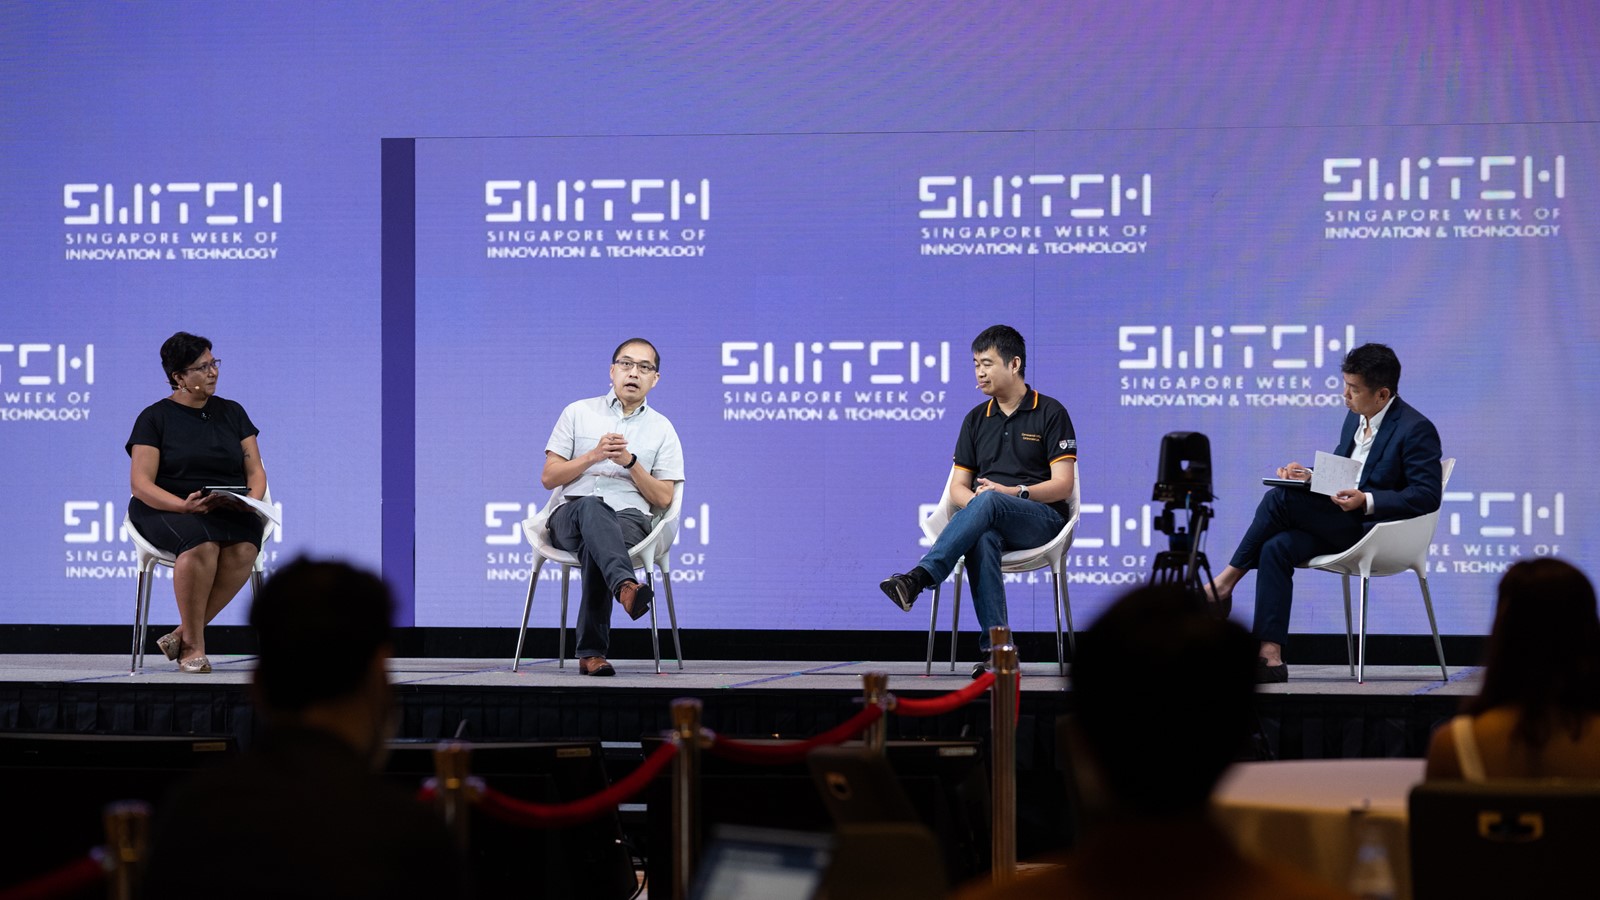 From left: Miss Sash Mukherjee moderating a panel discussion at the Singapore Week of Innovation and Technology, where Mr Tan Boon Khai, Dr David Woon, and Mr Alvin Ng shared their views on how smart districts will power innovation